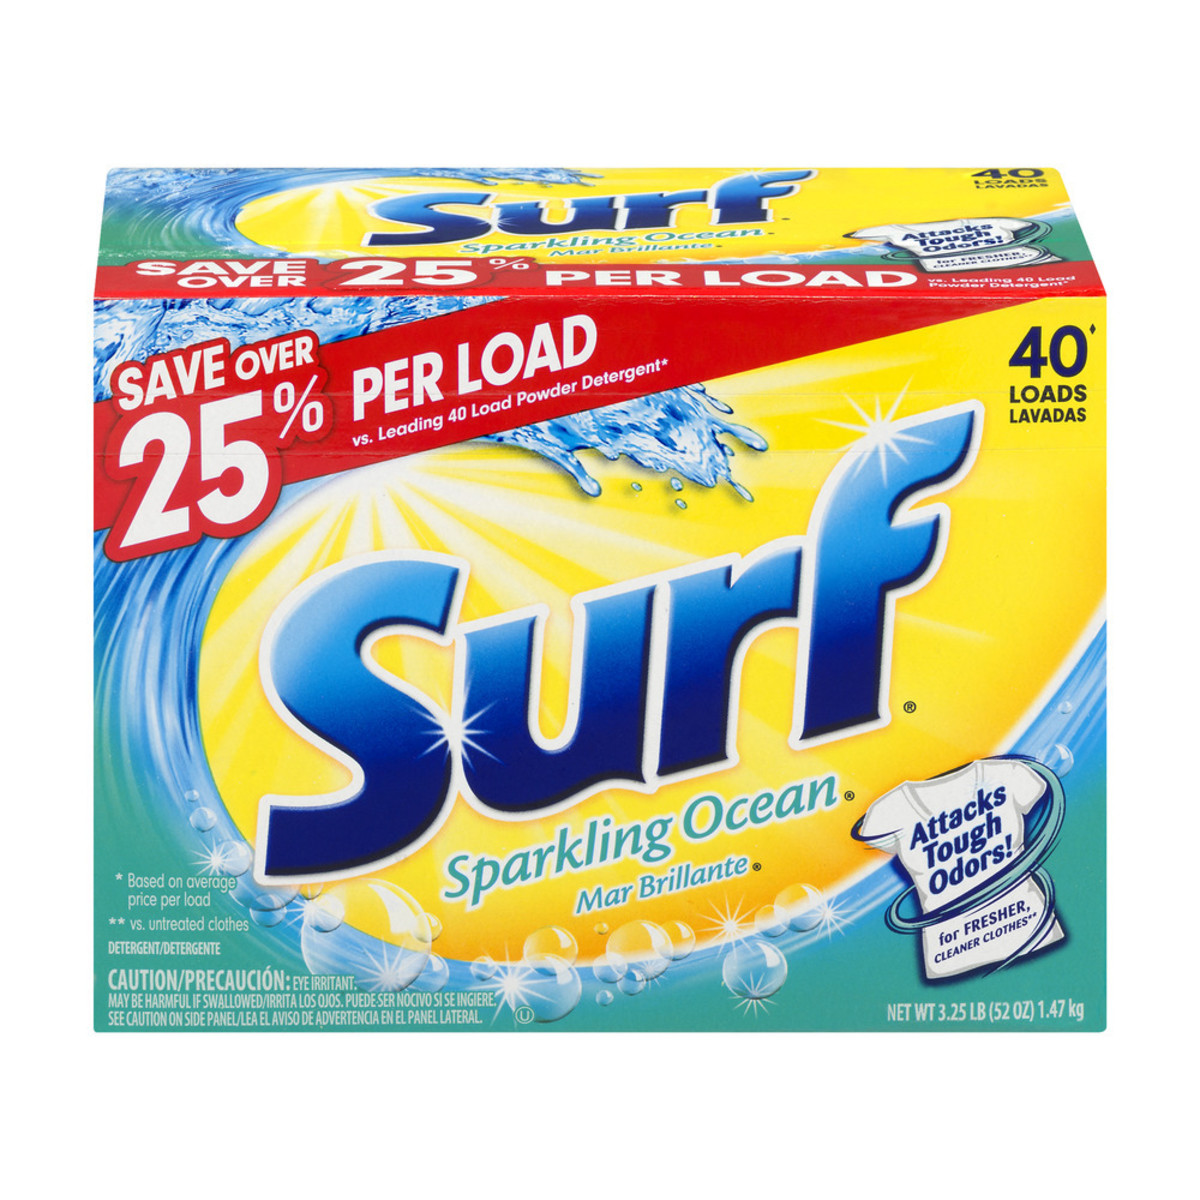 In 1959, Surf laundry detergent appeared on American grocery store shelves for the first time.